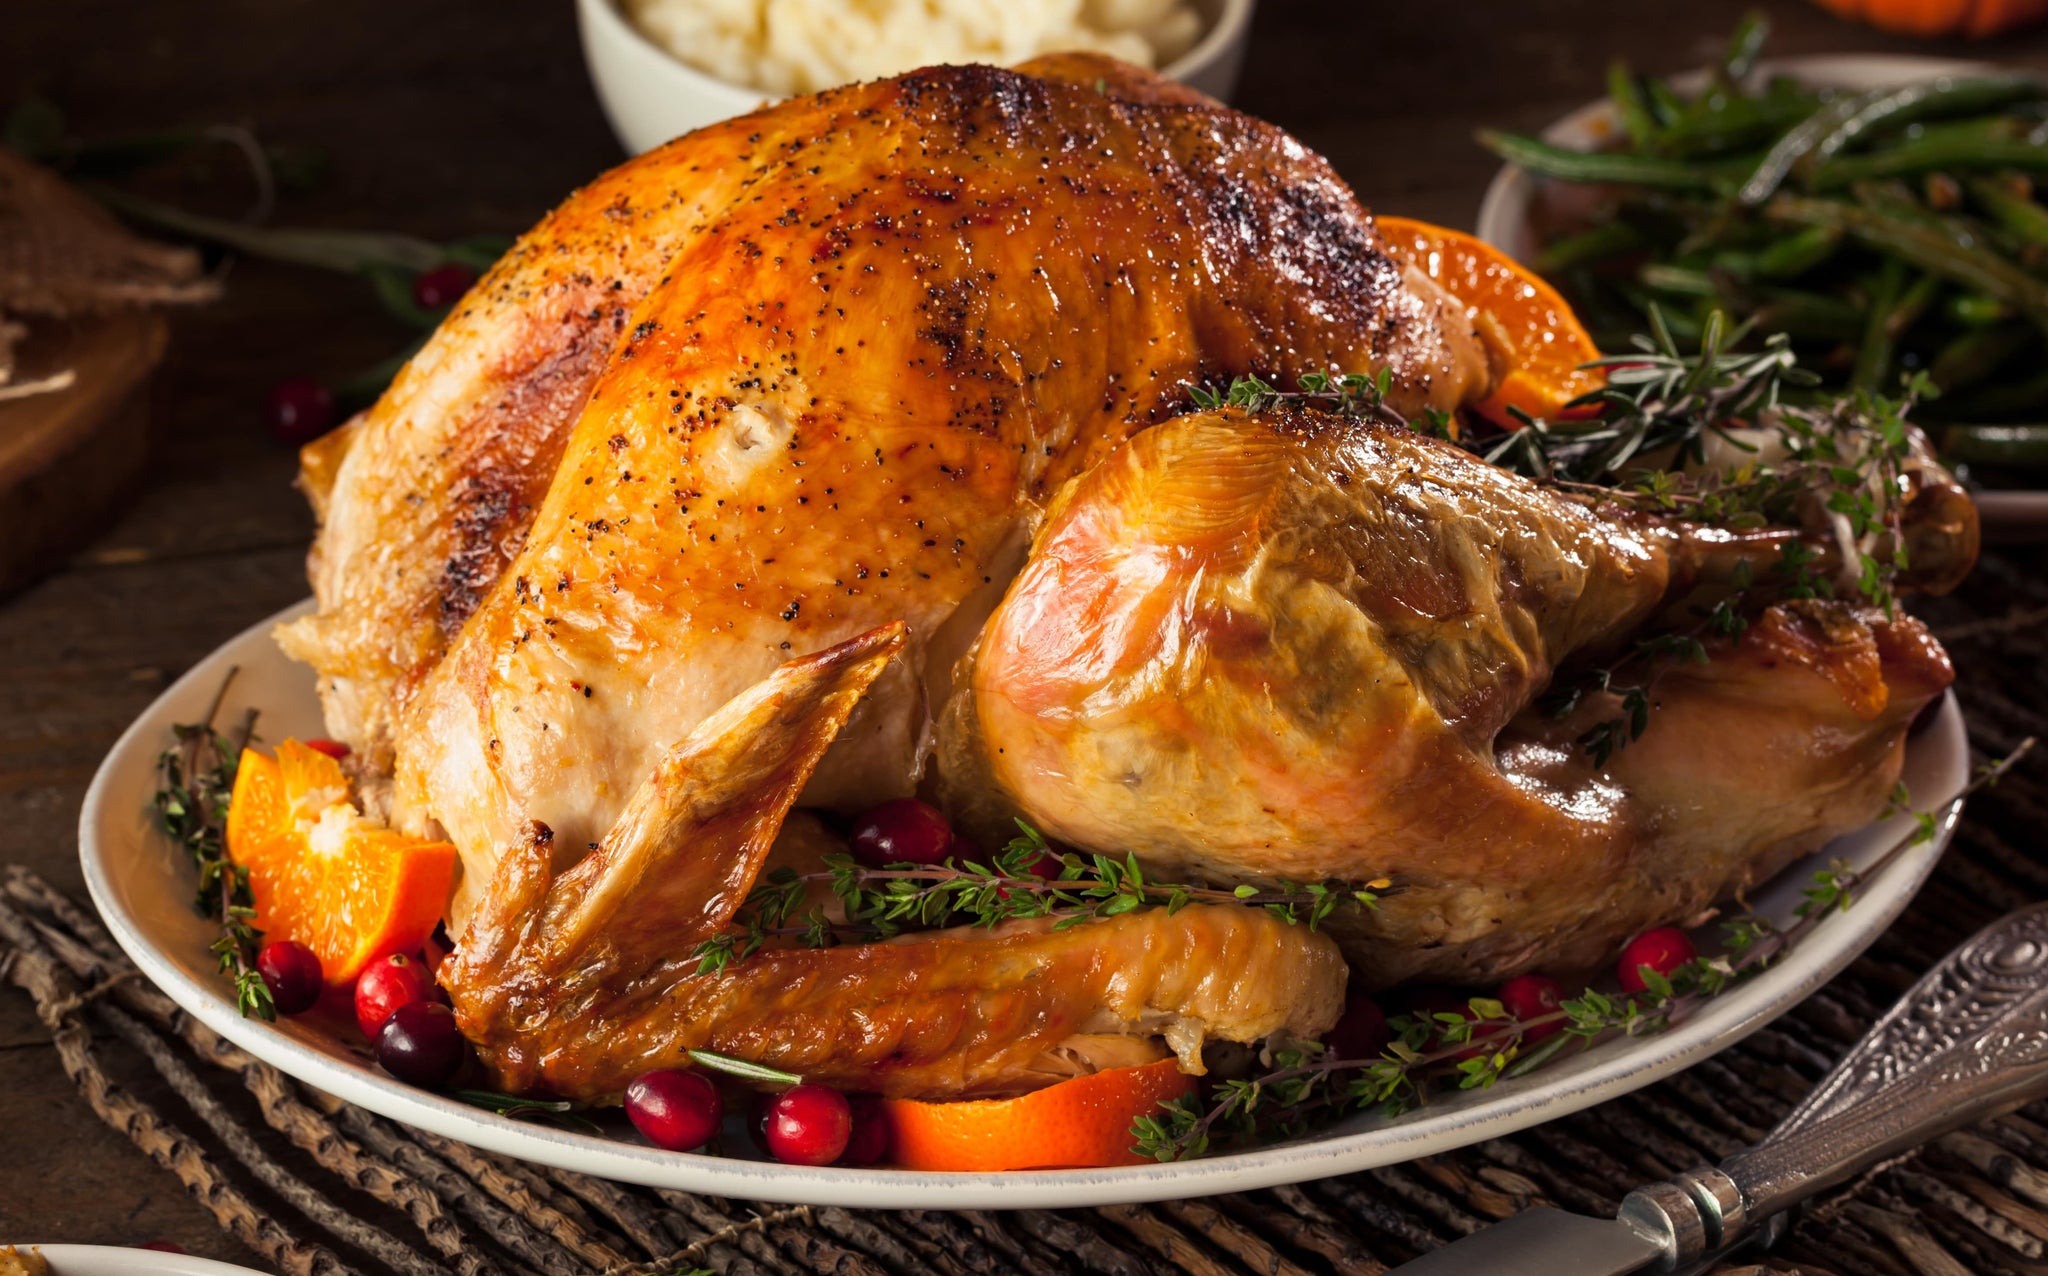 What Temperature to Cook Turkey?